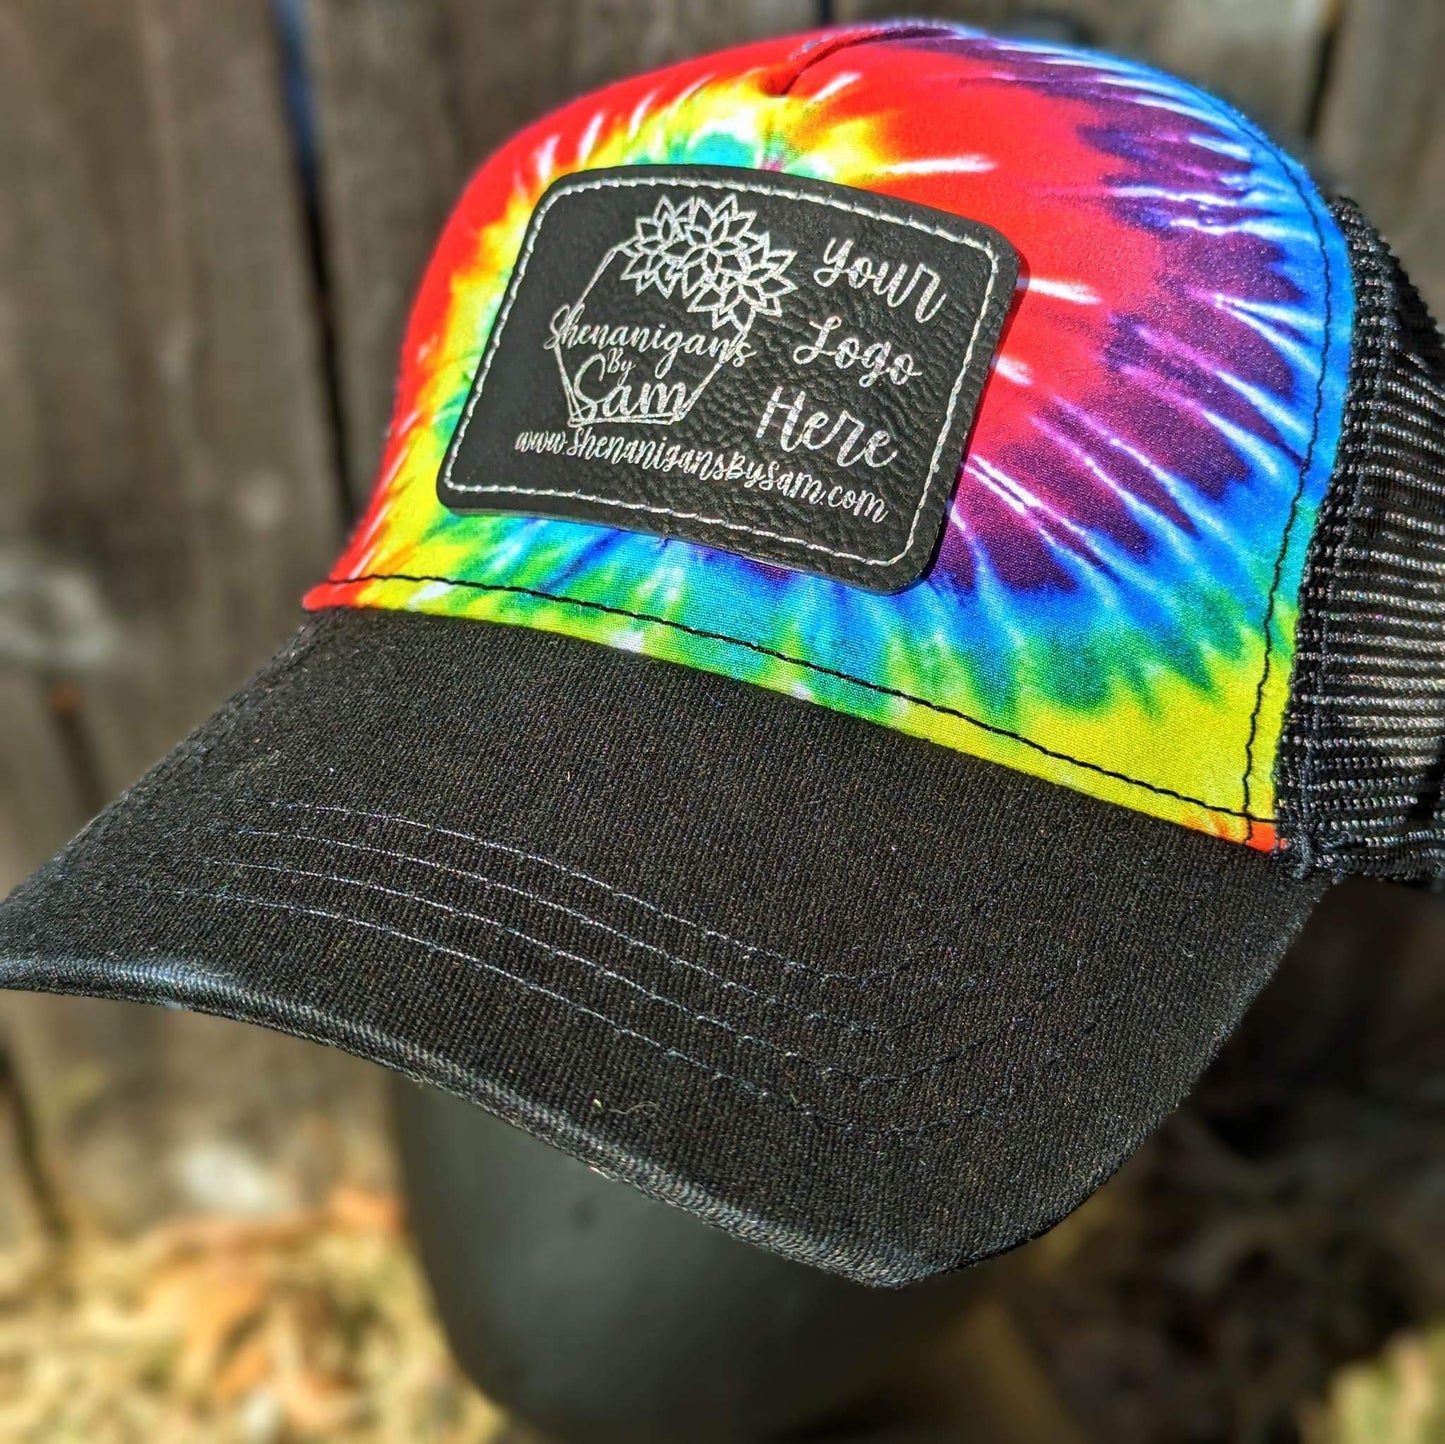 Tie Dye 6 Panel Snap Mesh Back Trucker Hat with Patch